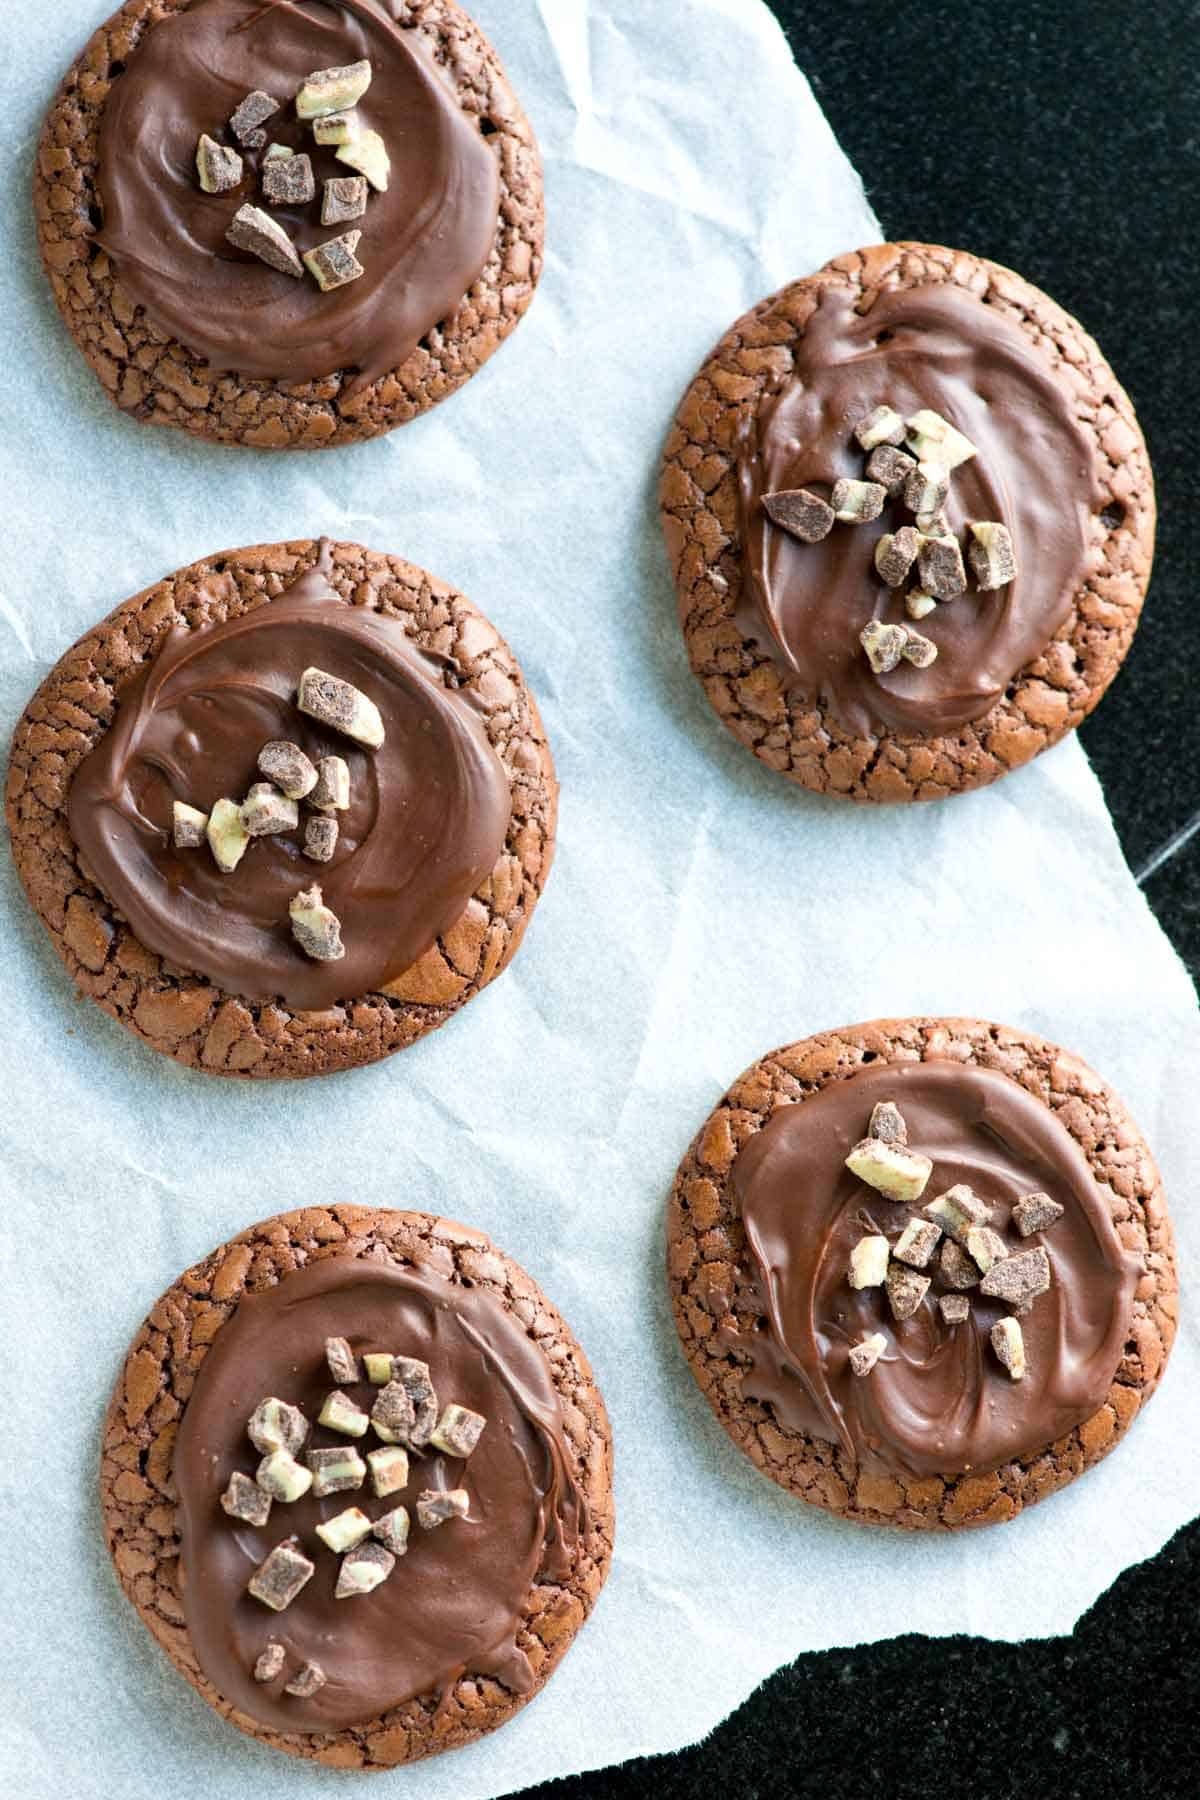 How to Make Mint Chocolate Cookies